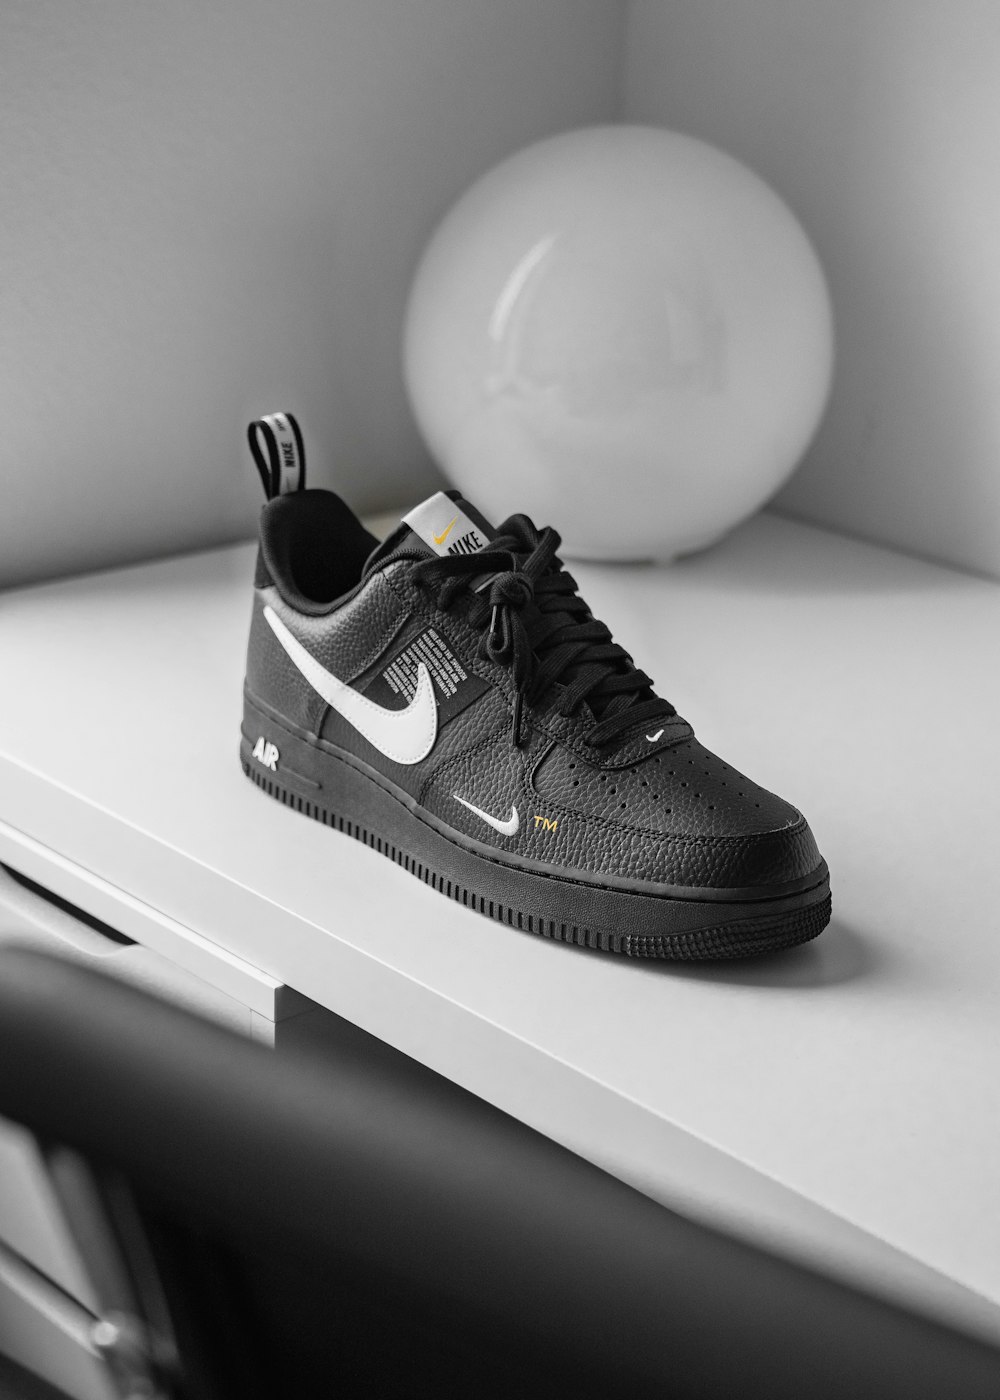 unpaired OFF WHITE X Nike Air Force 1 low-top sneaker